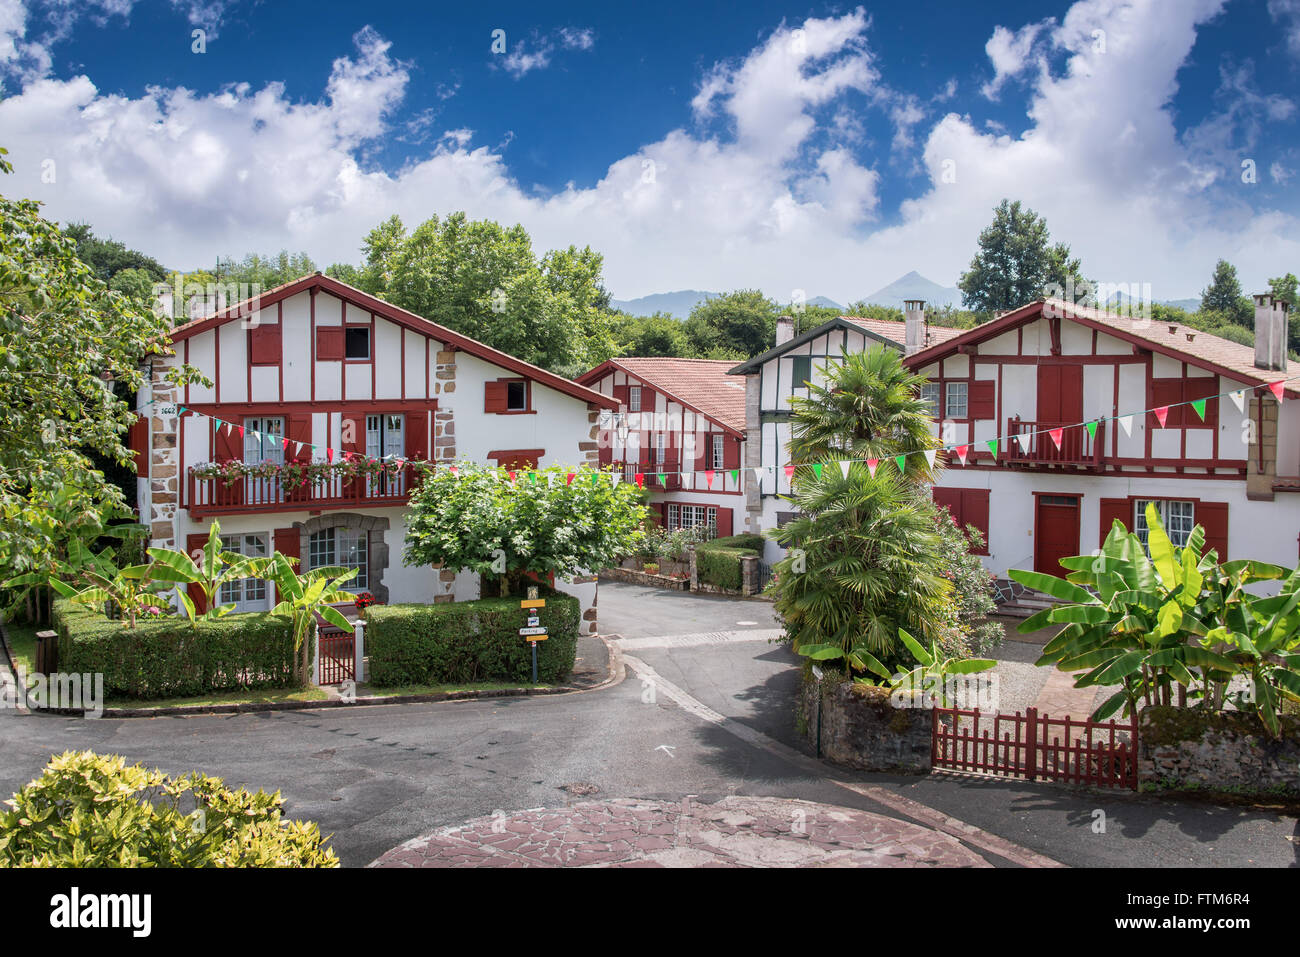 Traditional Labourdine houses in the village of Espelette, Basque country, France Stock Photo